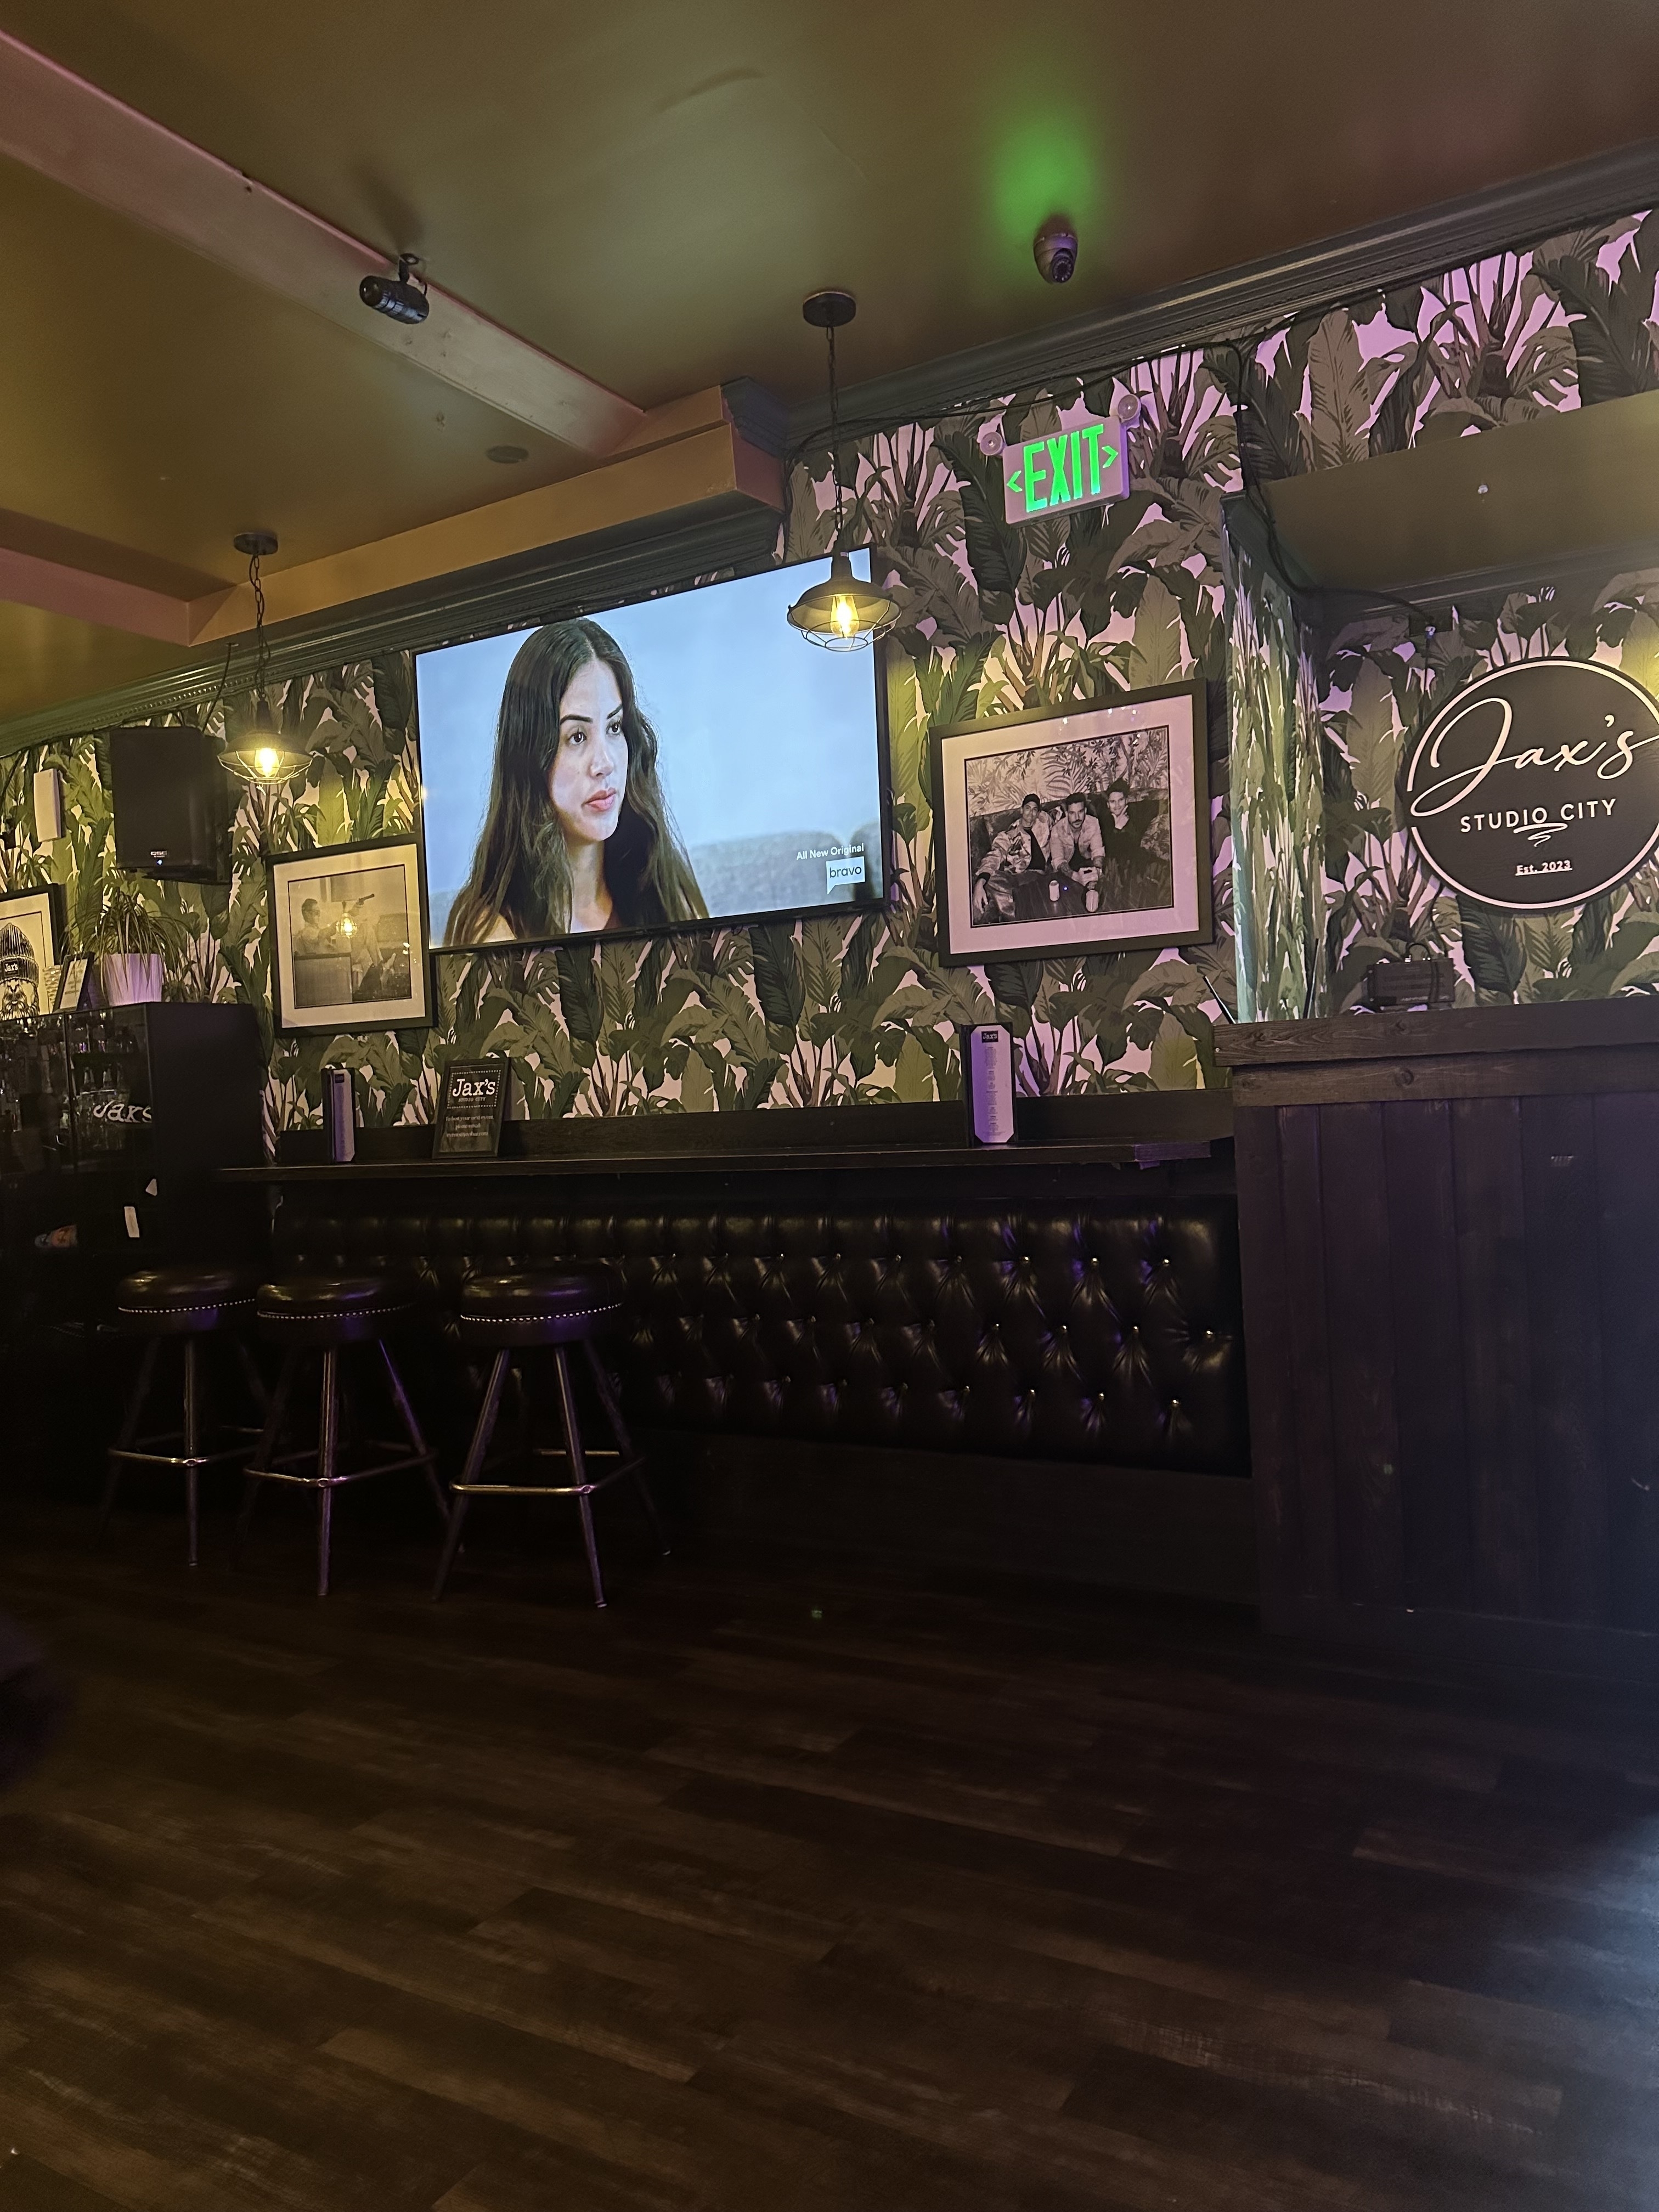 Interior of a bar with tropical wallpaper, framed pictures on the wall, and a TV screen displaying a woman